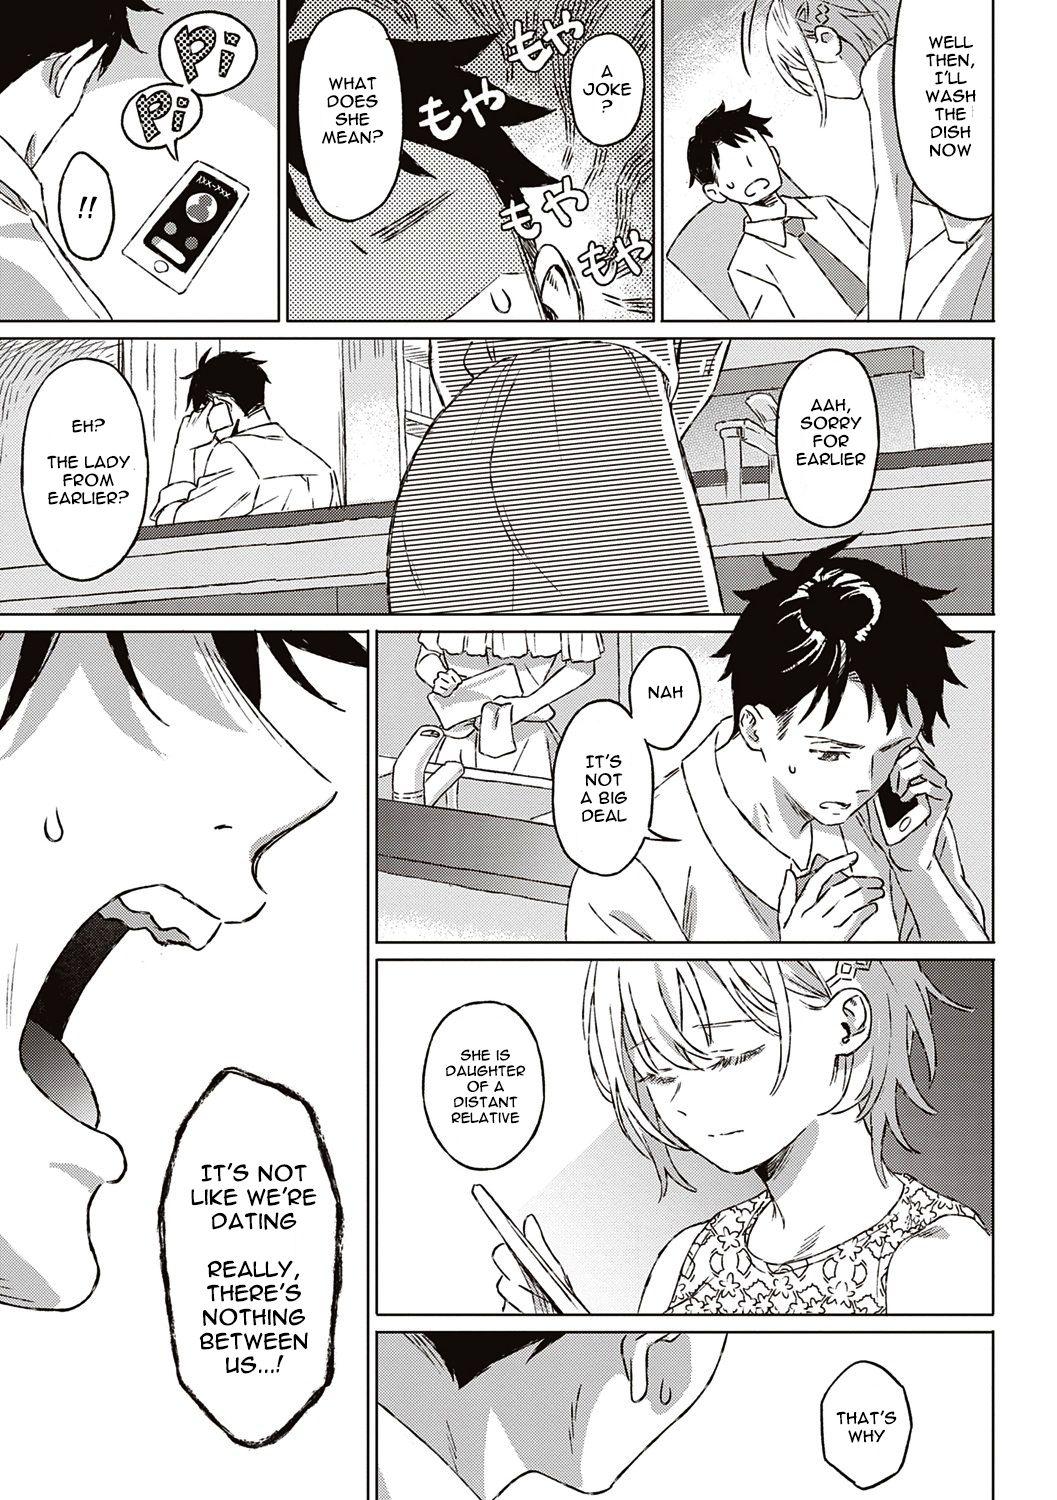 Small Tits Shinsou no Hanayome + After Story | Closeted Bride + After Story Wife - Page 7